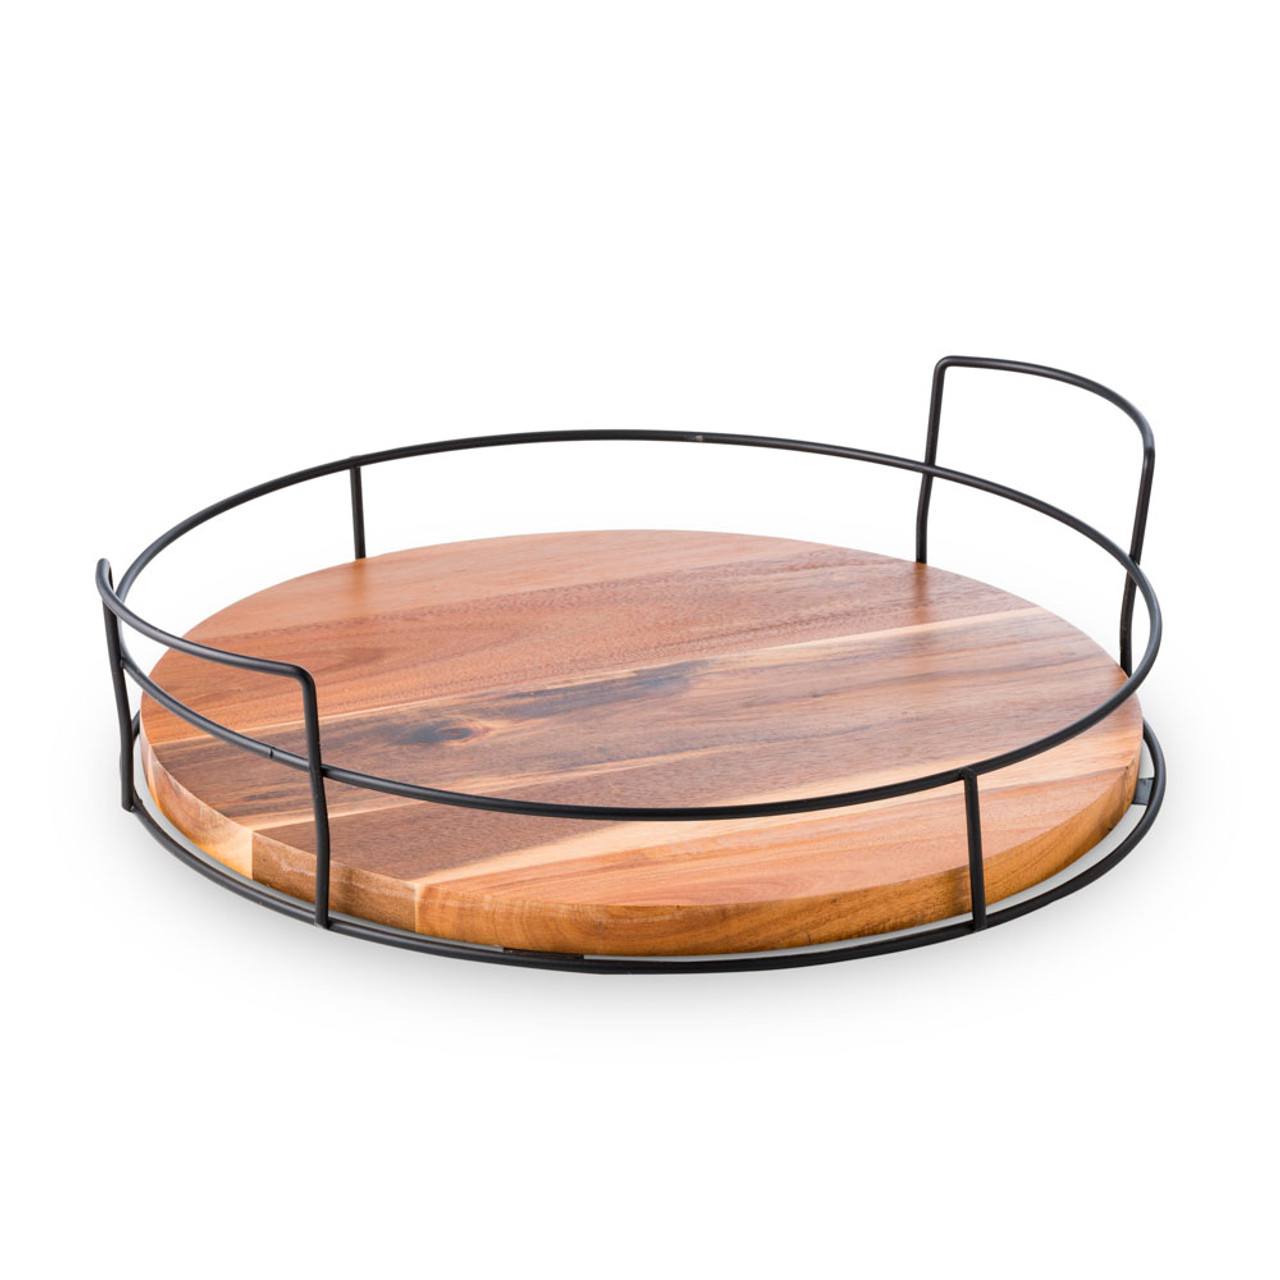 https://cdn11.bigcommerce.com/s-cznxq08r7/images/stencil/1280x1280/products/5564/14905/10934_Modern_Manor_Acacia_Wood_Cocktail_Serving_Tray_1__93479.1671815951.jpg?c=1